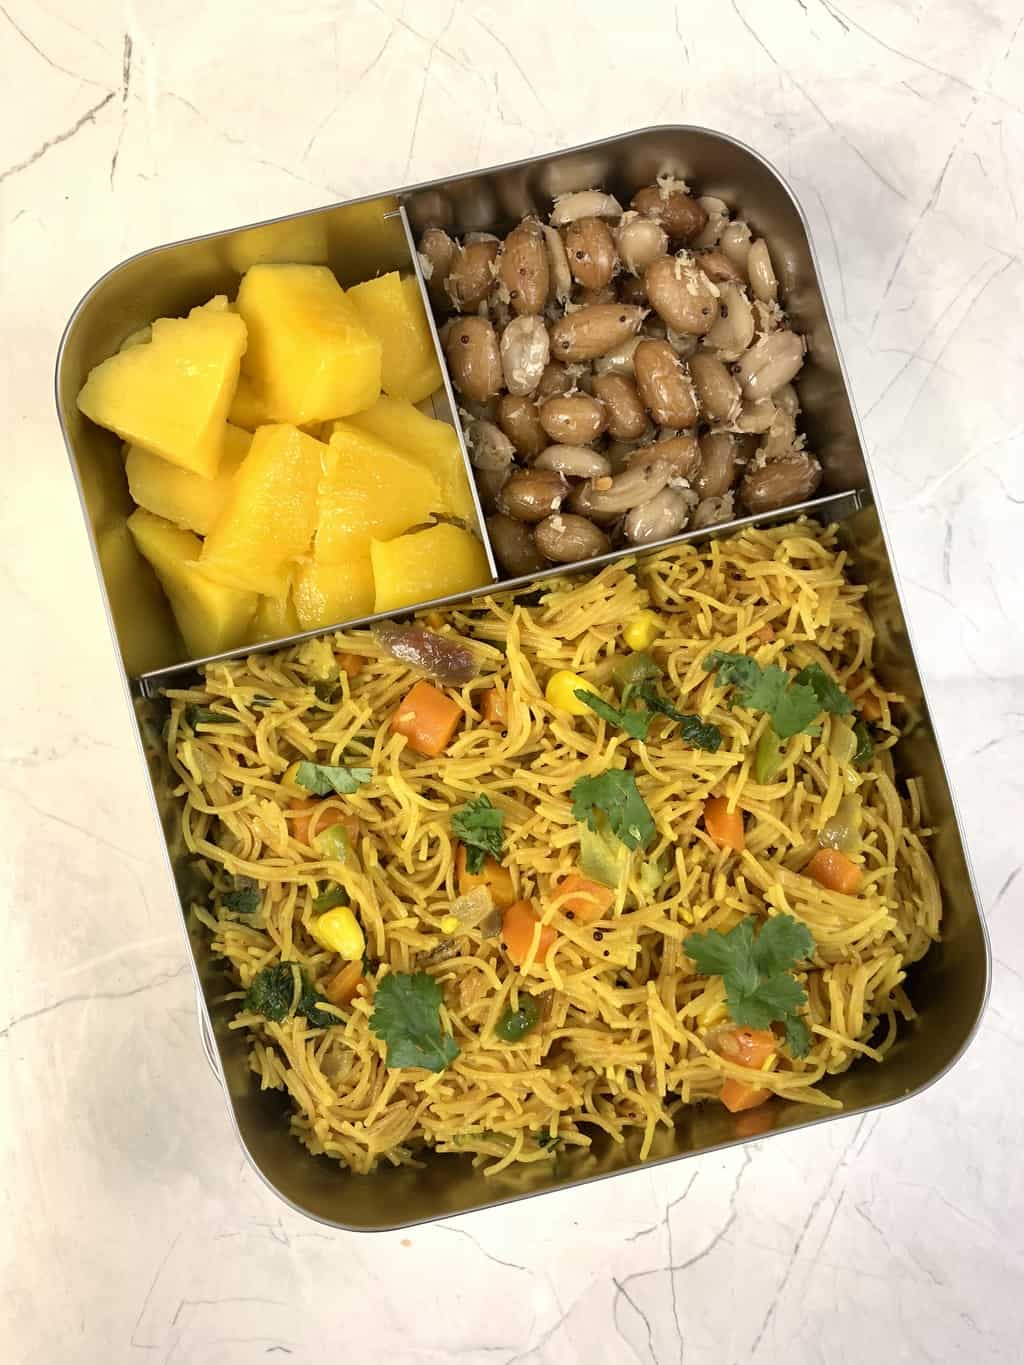 vermicelli upma with peanut sundal and mango in steel bento lunch box.